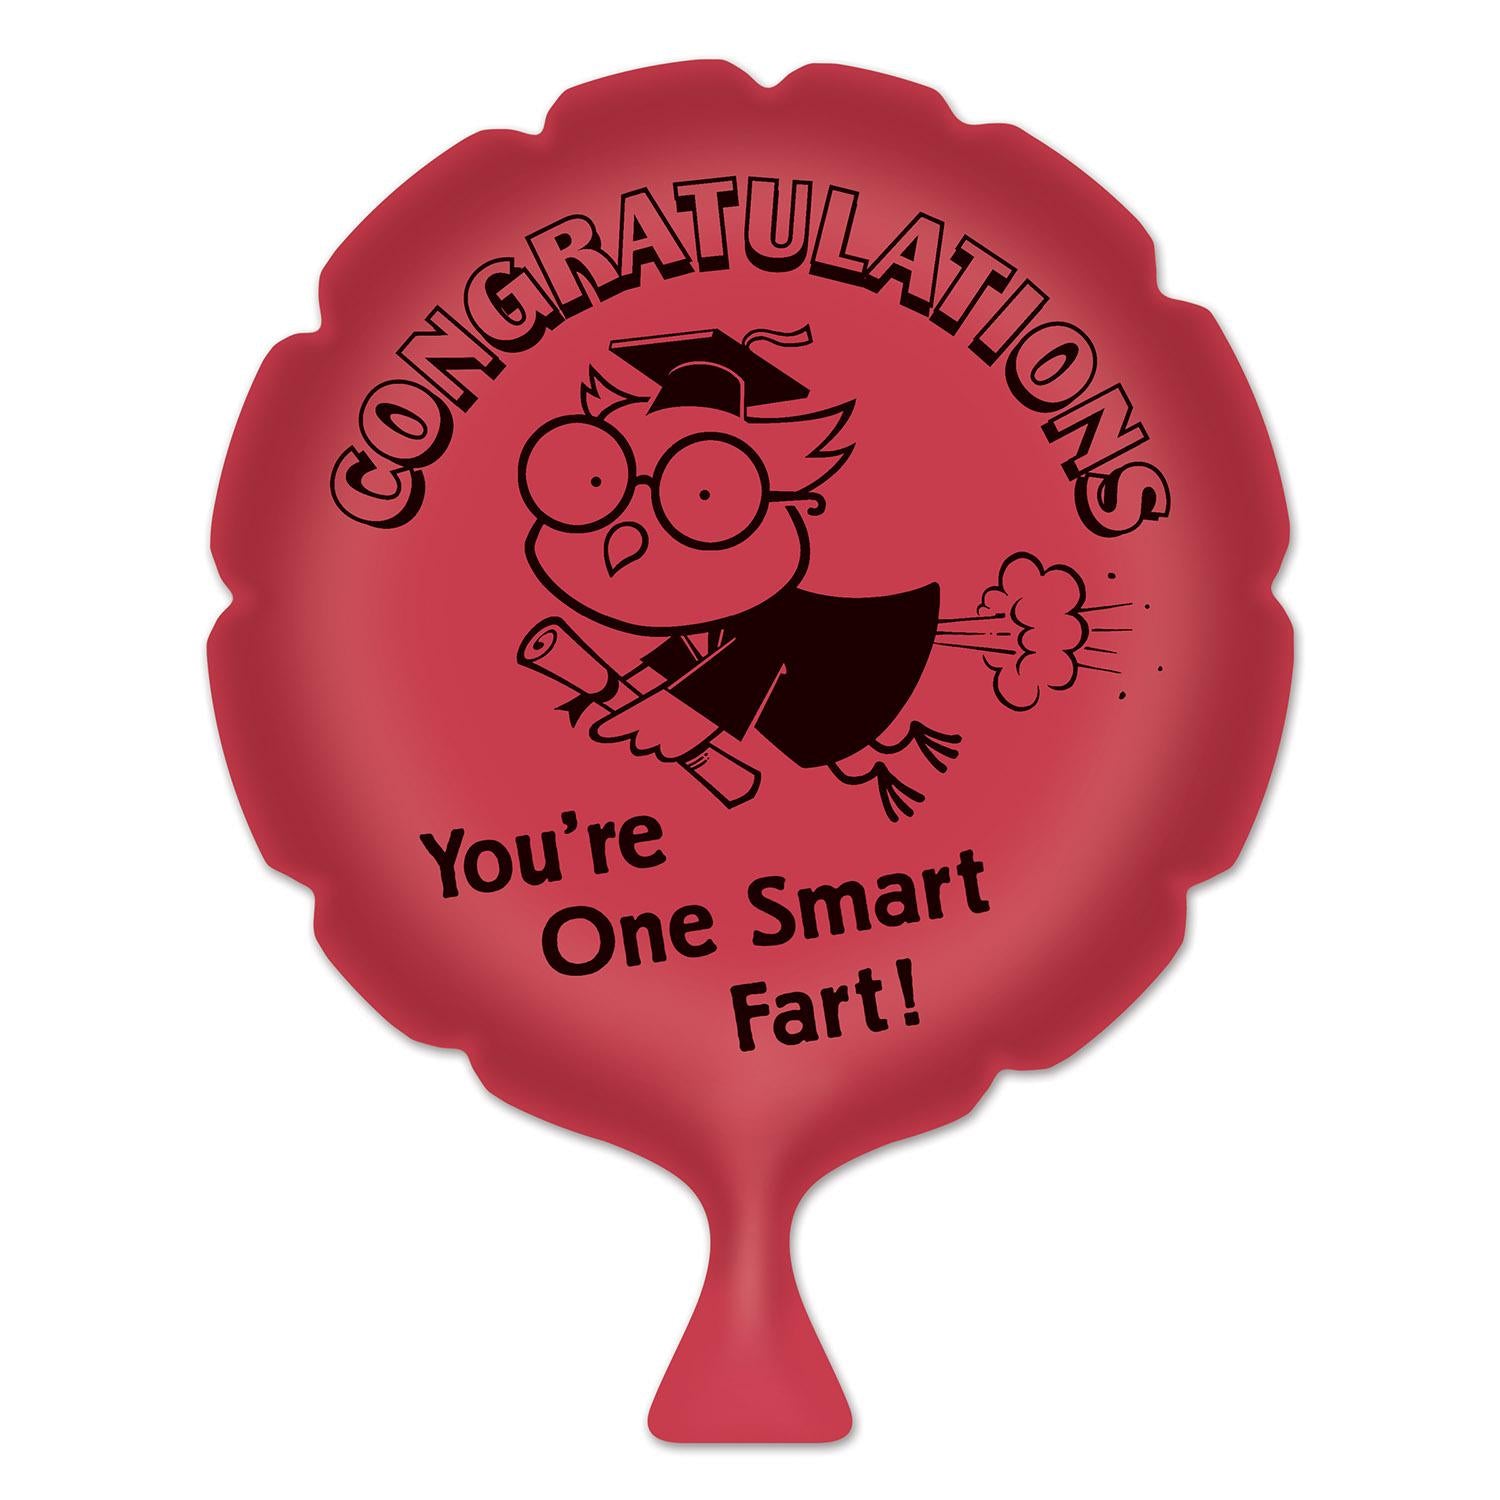 You're One Smart Fart! Graduation Party Whoopee Cushion